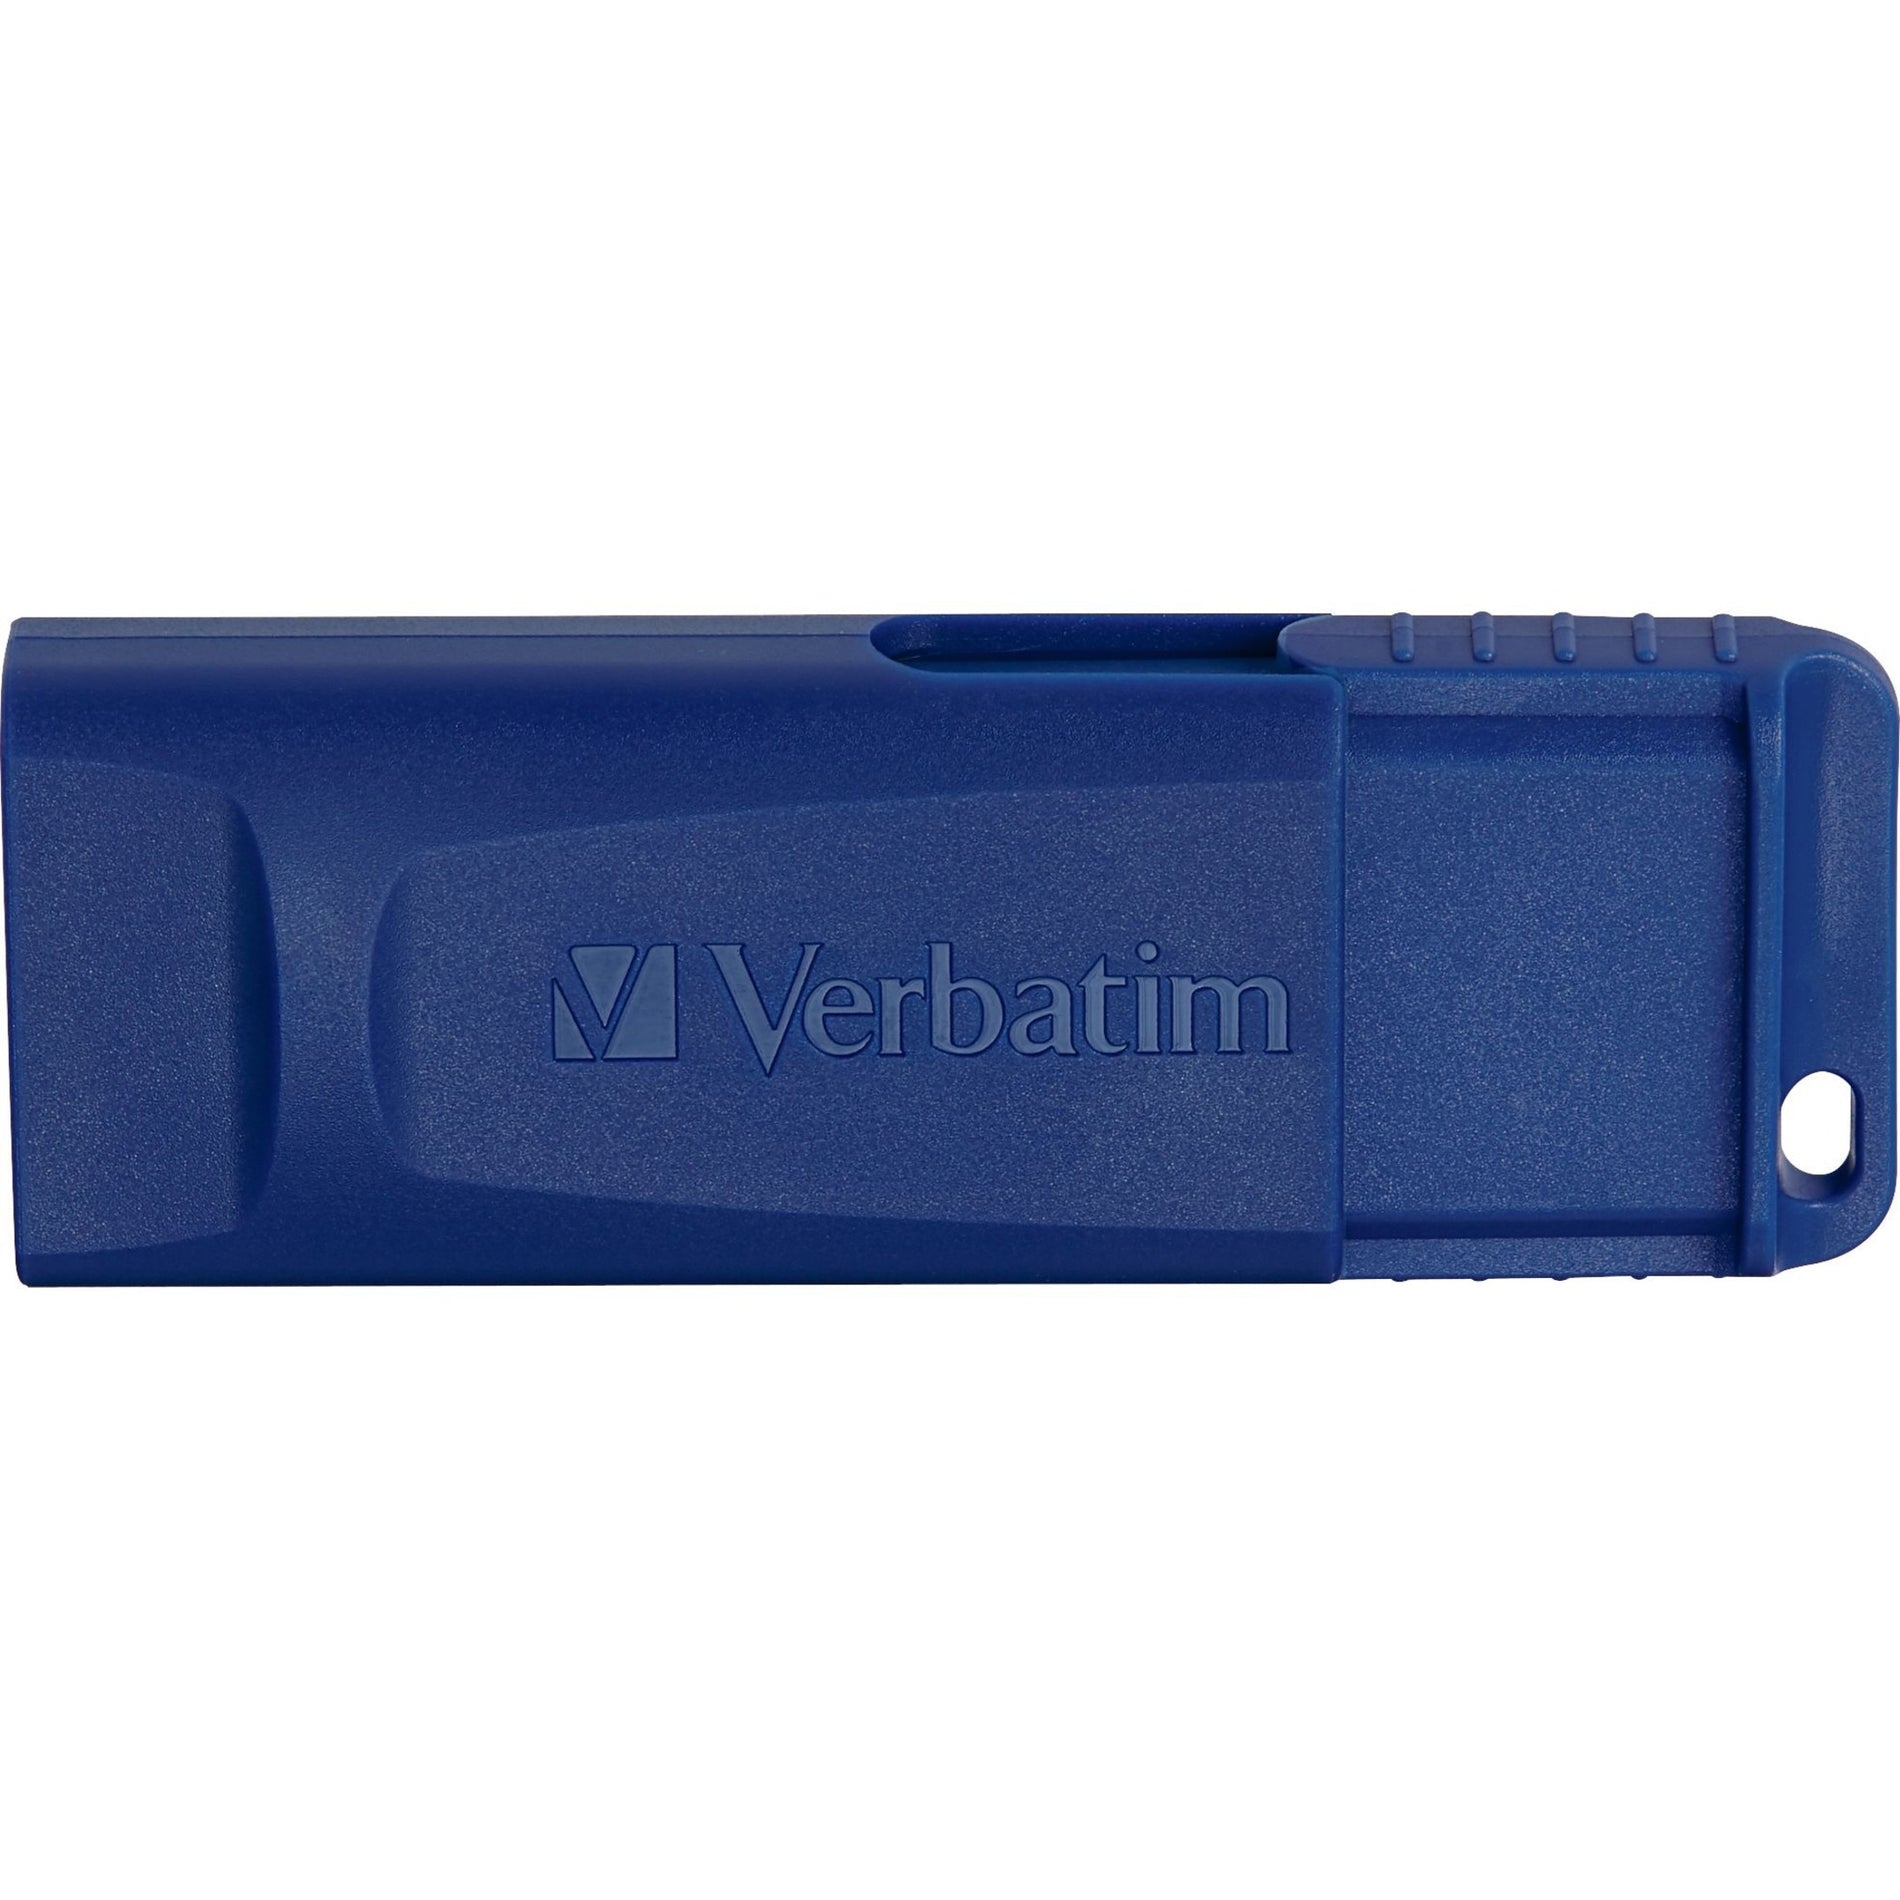 Microban 99123 Store 'n' Go 16GB USB Flash Drive Pack, Antimicrobial, Password Protection, Capless, Retractable